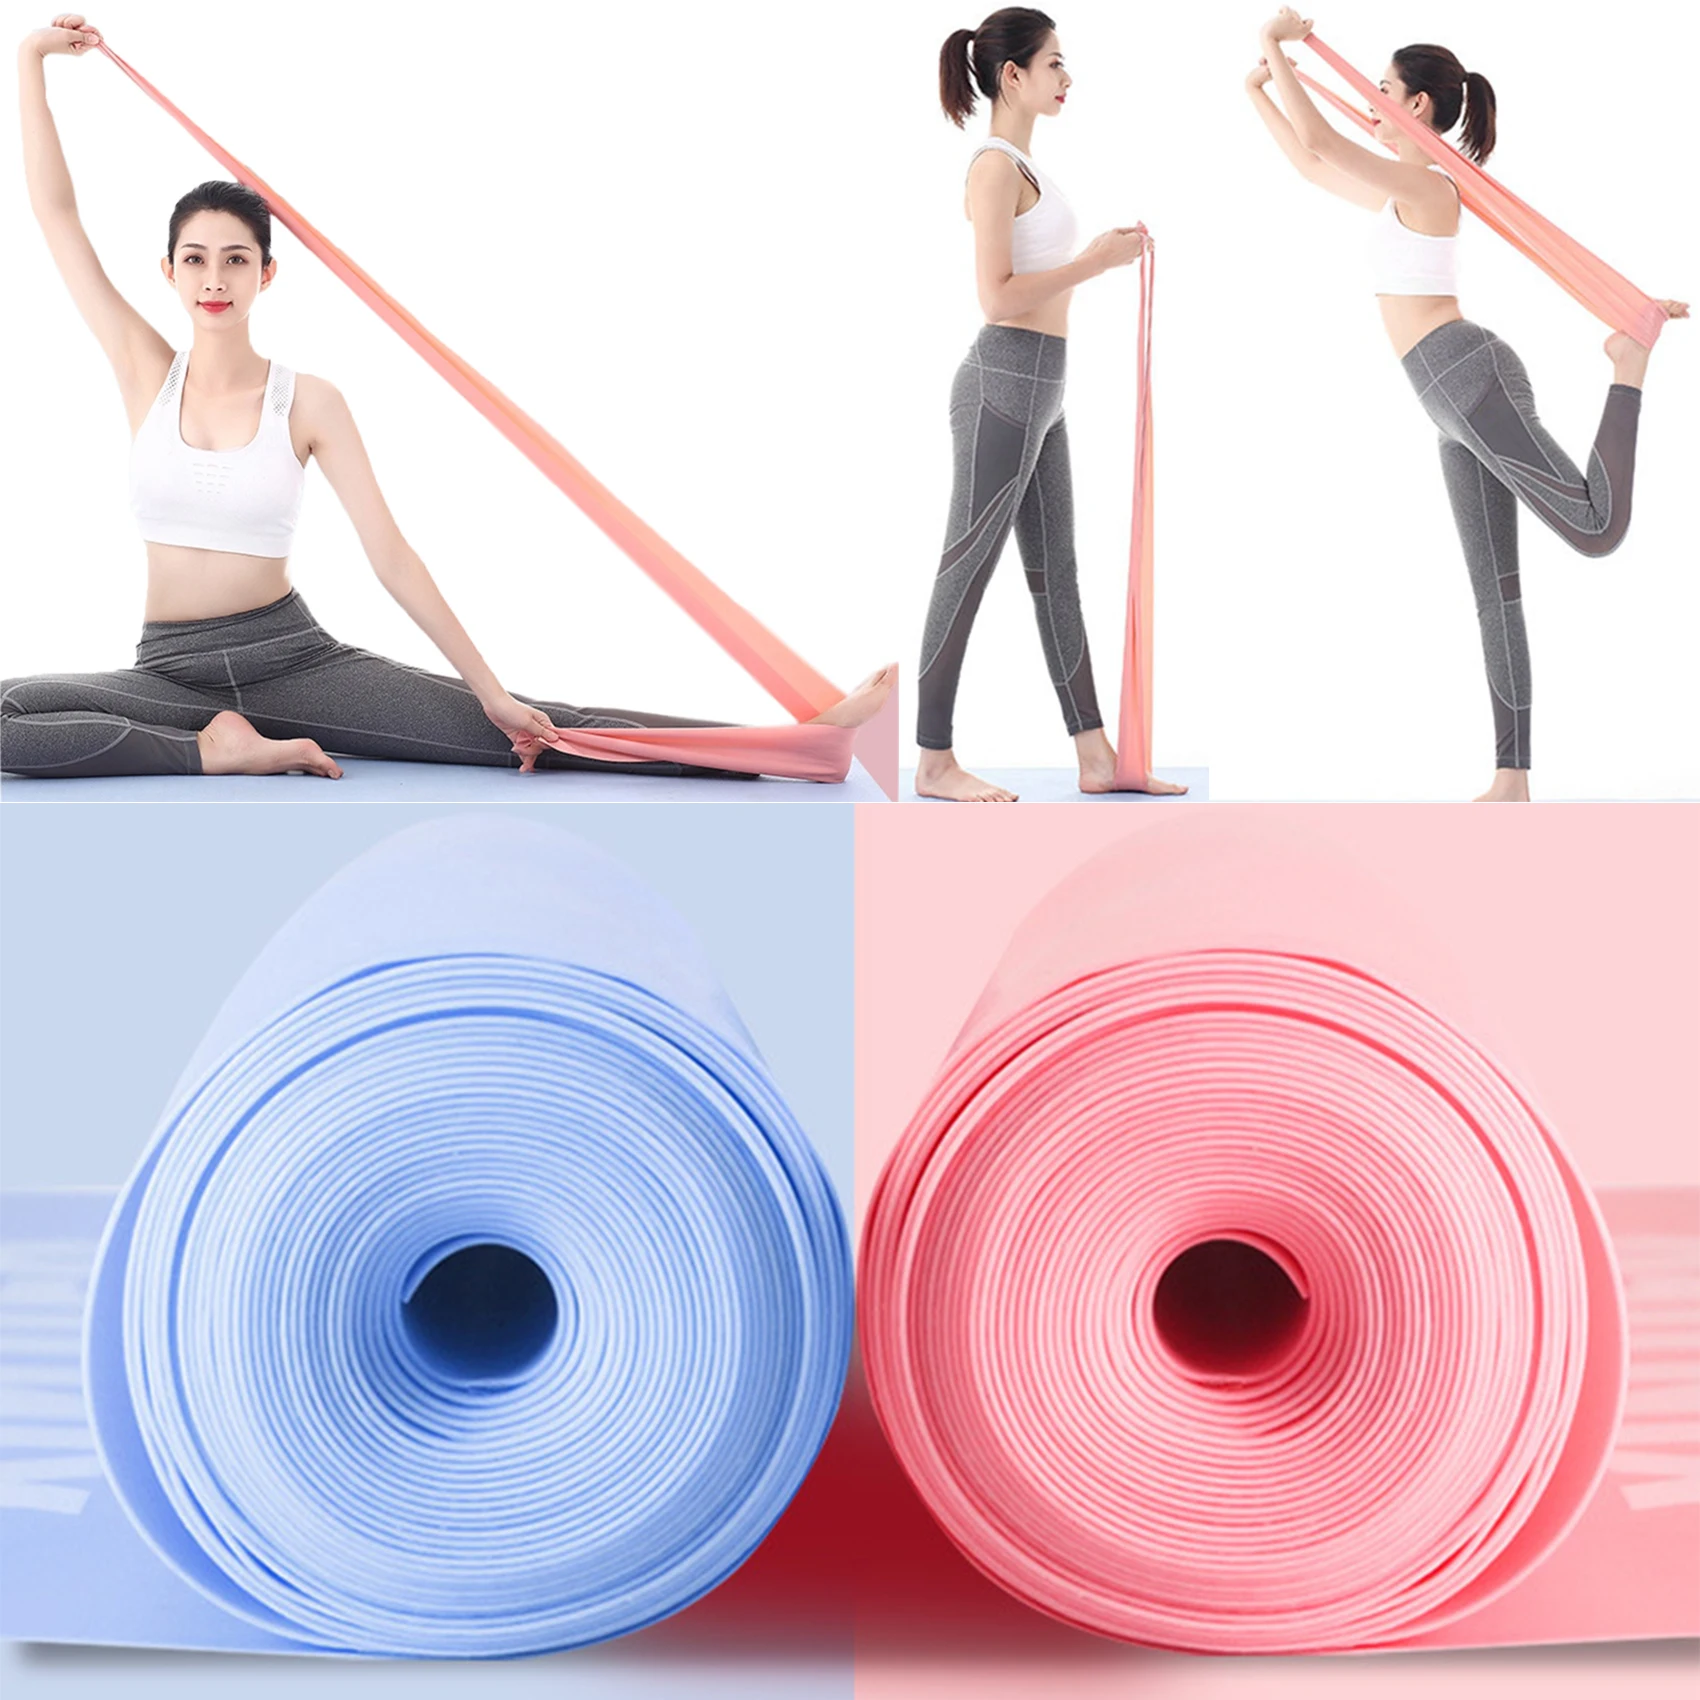 

Resistance Bands Straps Exercise Bands for Physical Therapy Strength Training Yoga Pilates Stretching Non-Latex Elastic Band